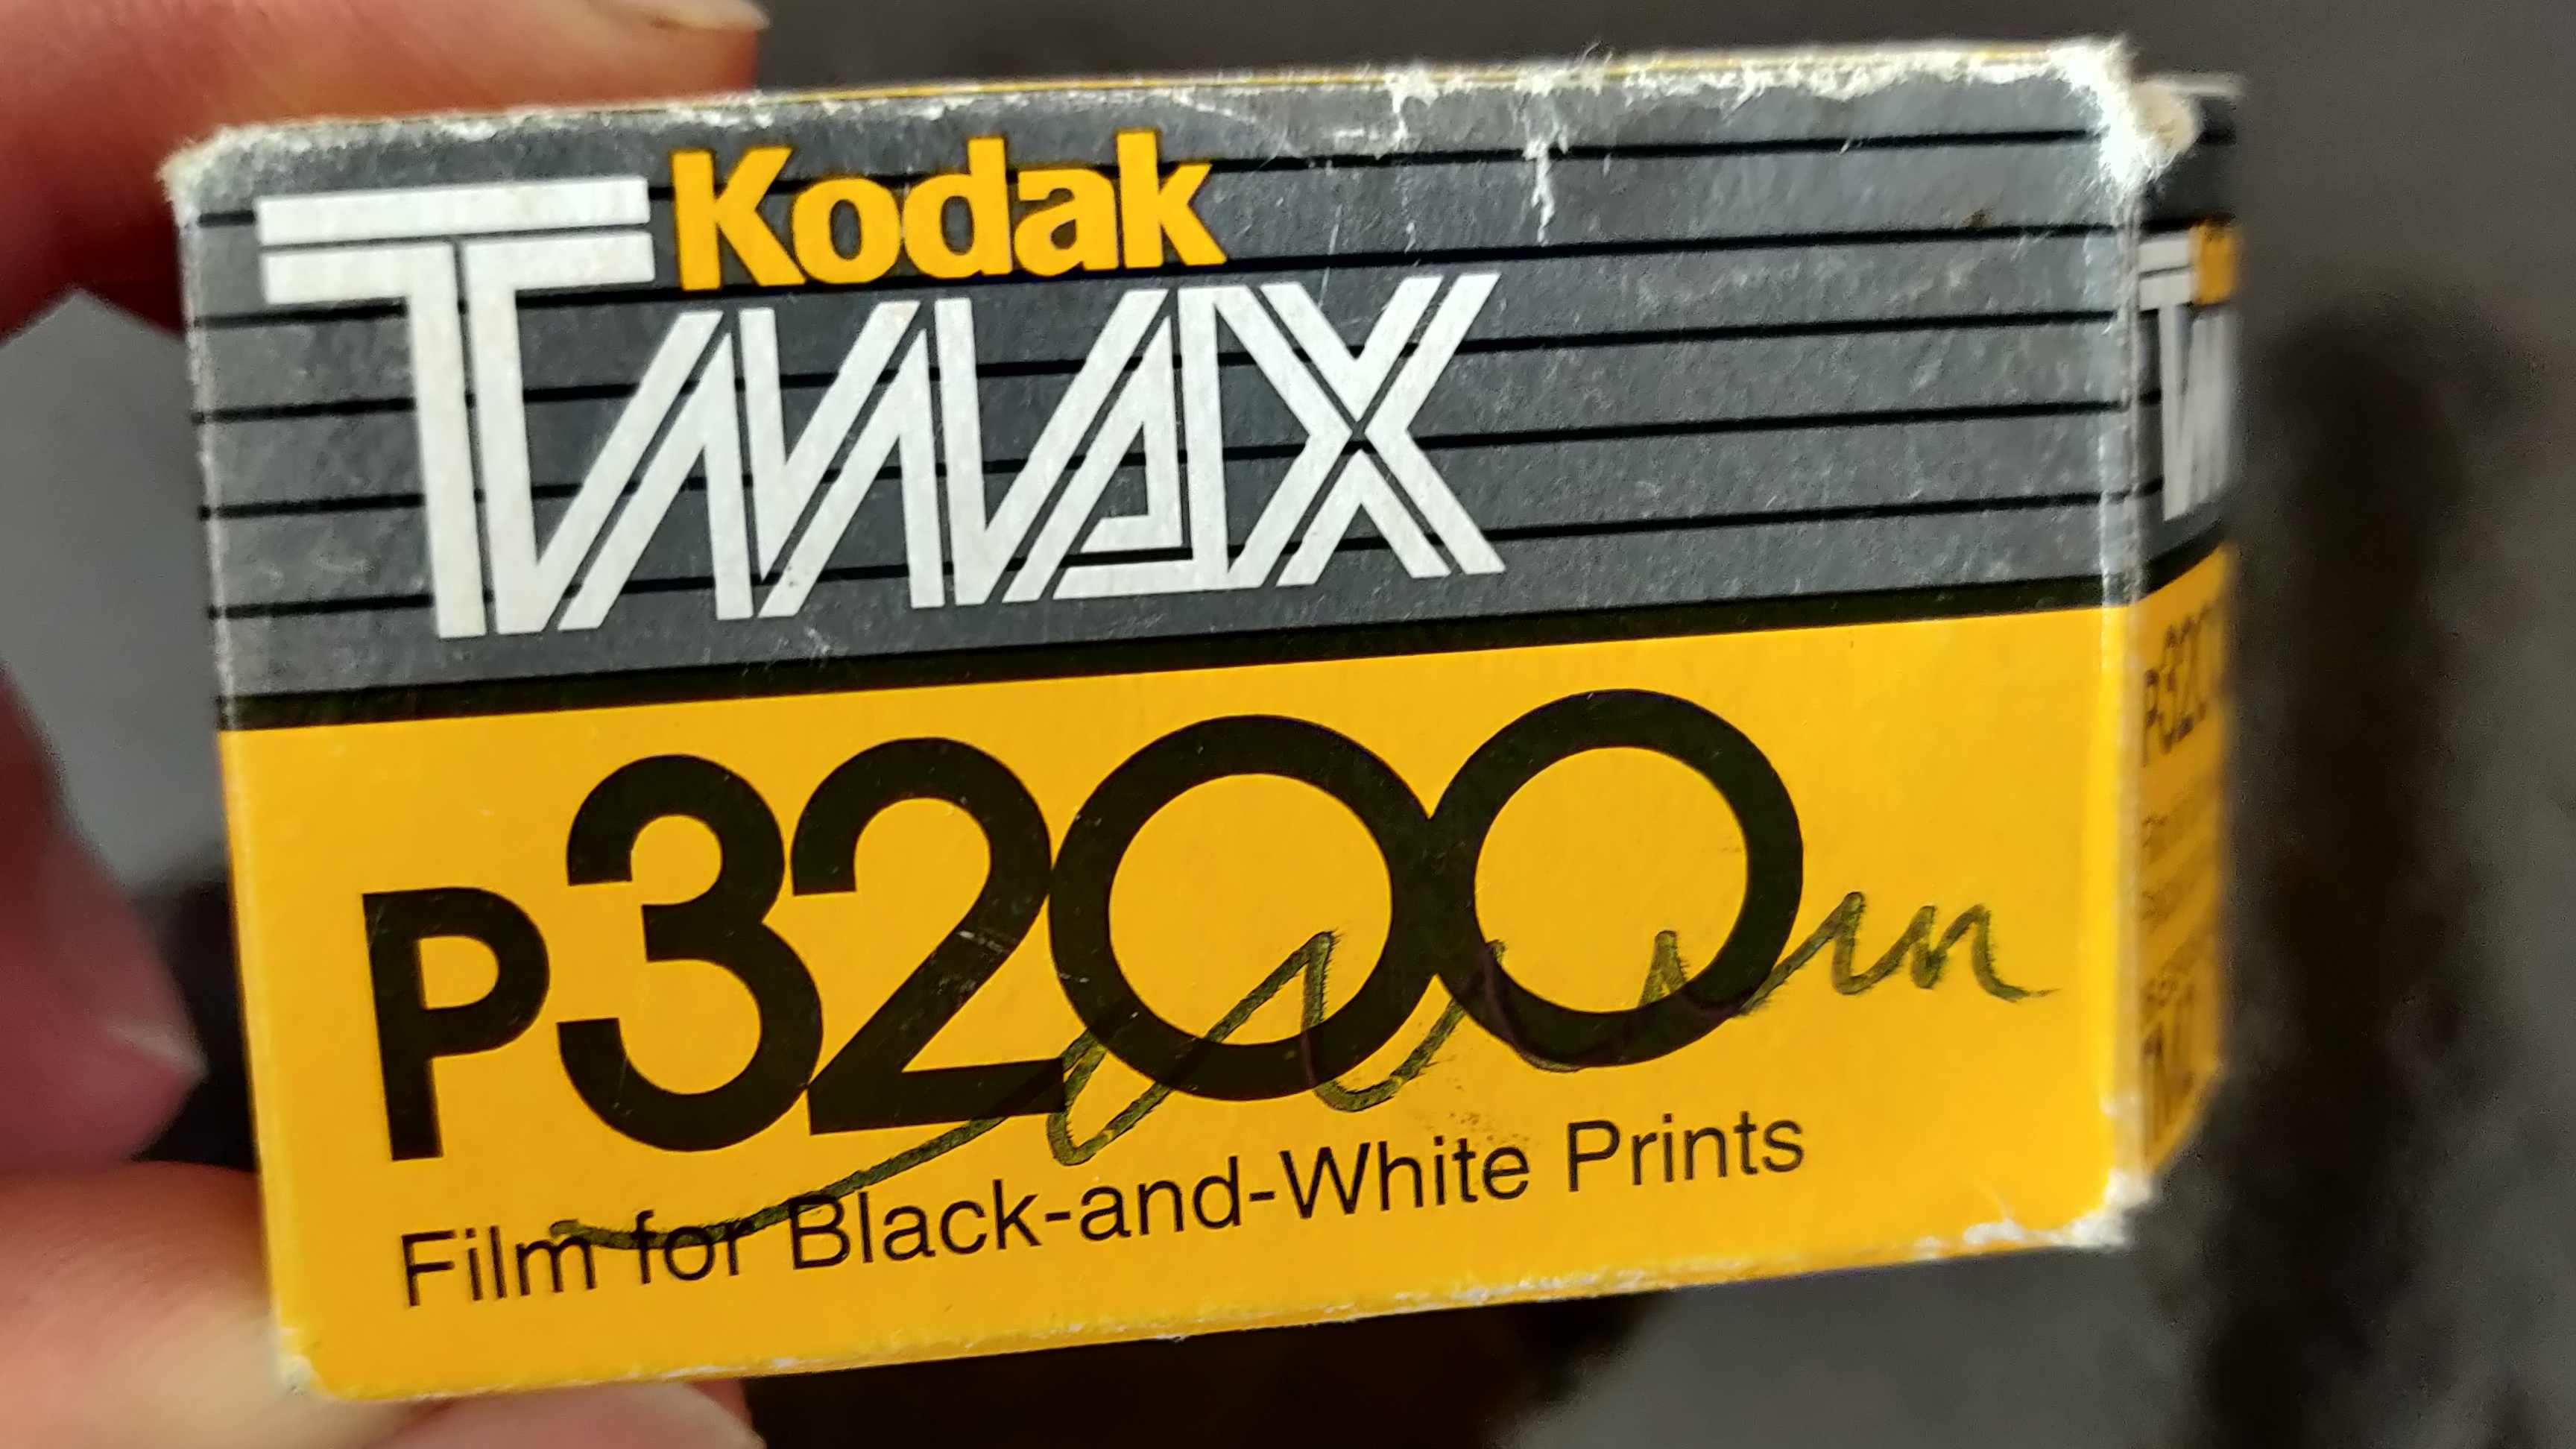 I shot a 30-year-old roll of expired Kodak film and I was amazed 